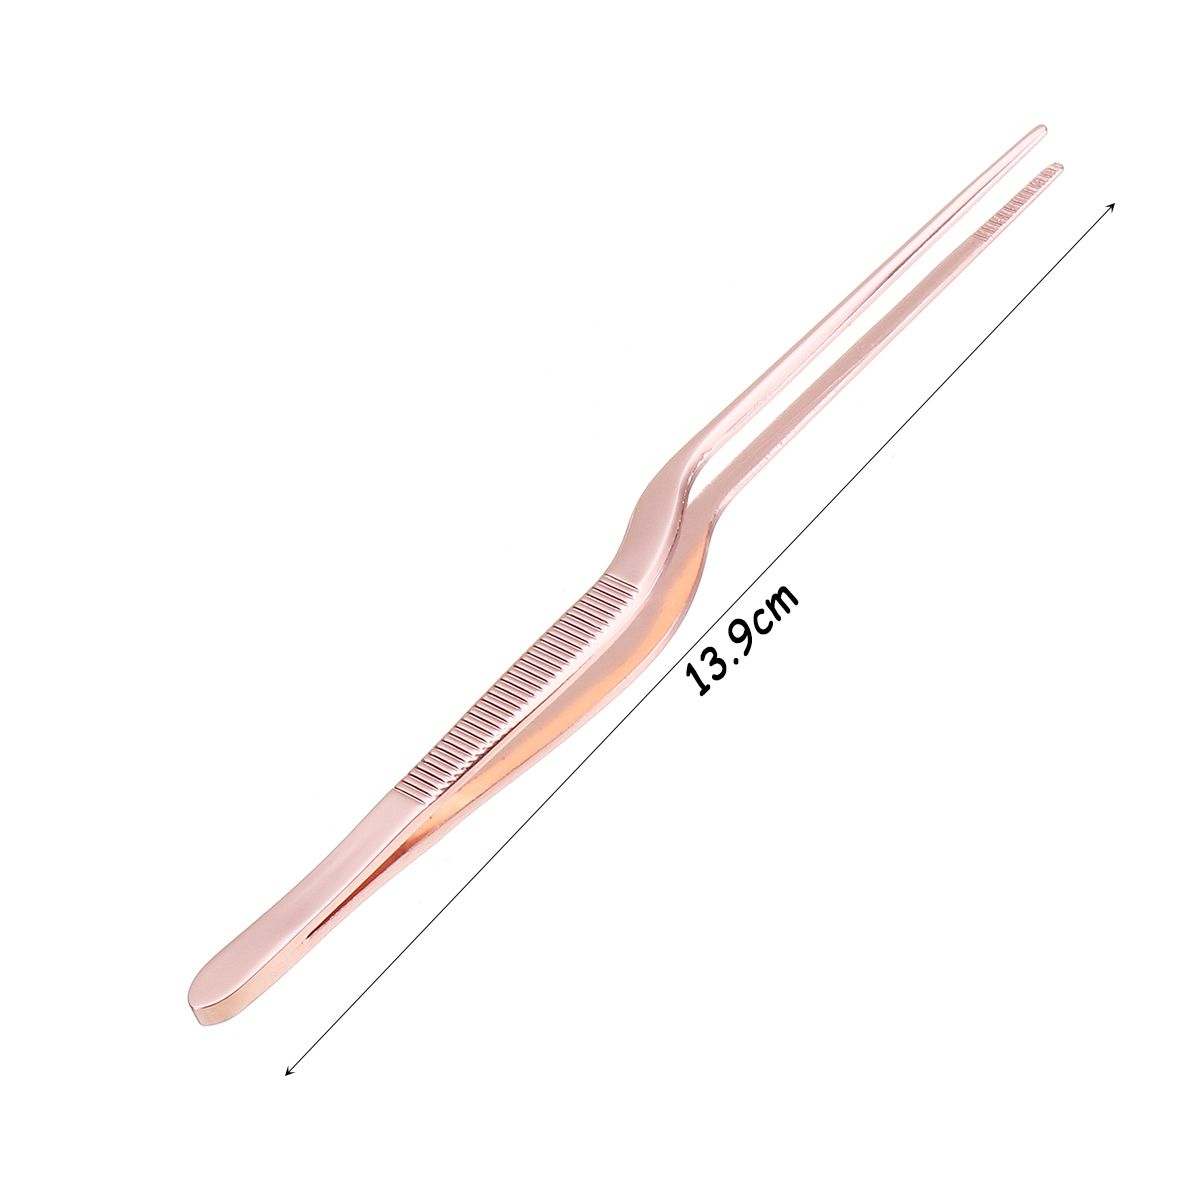 Stainless-Steel-Offset-Tweezer-Chef-Plating-Tongs-Serving-Presentation-Rose-Gold-1368952